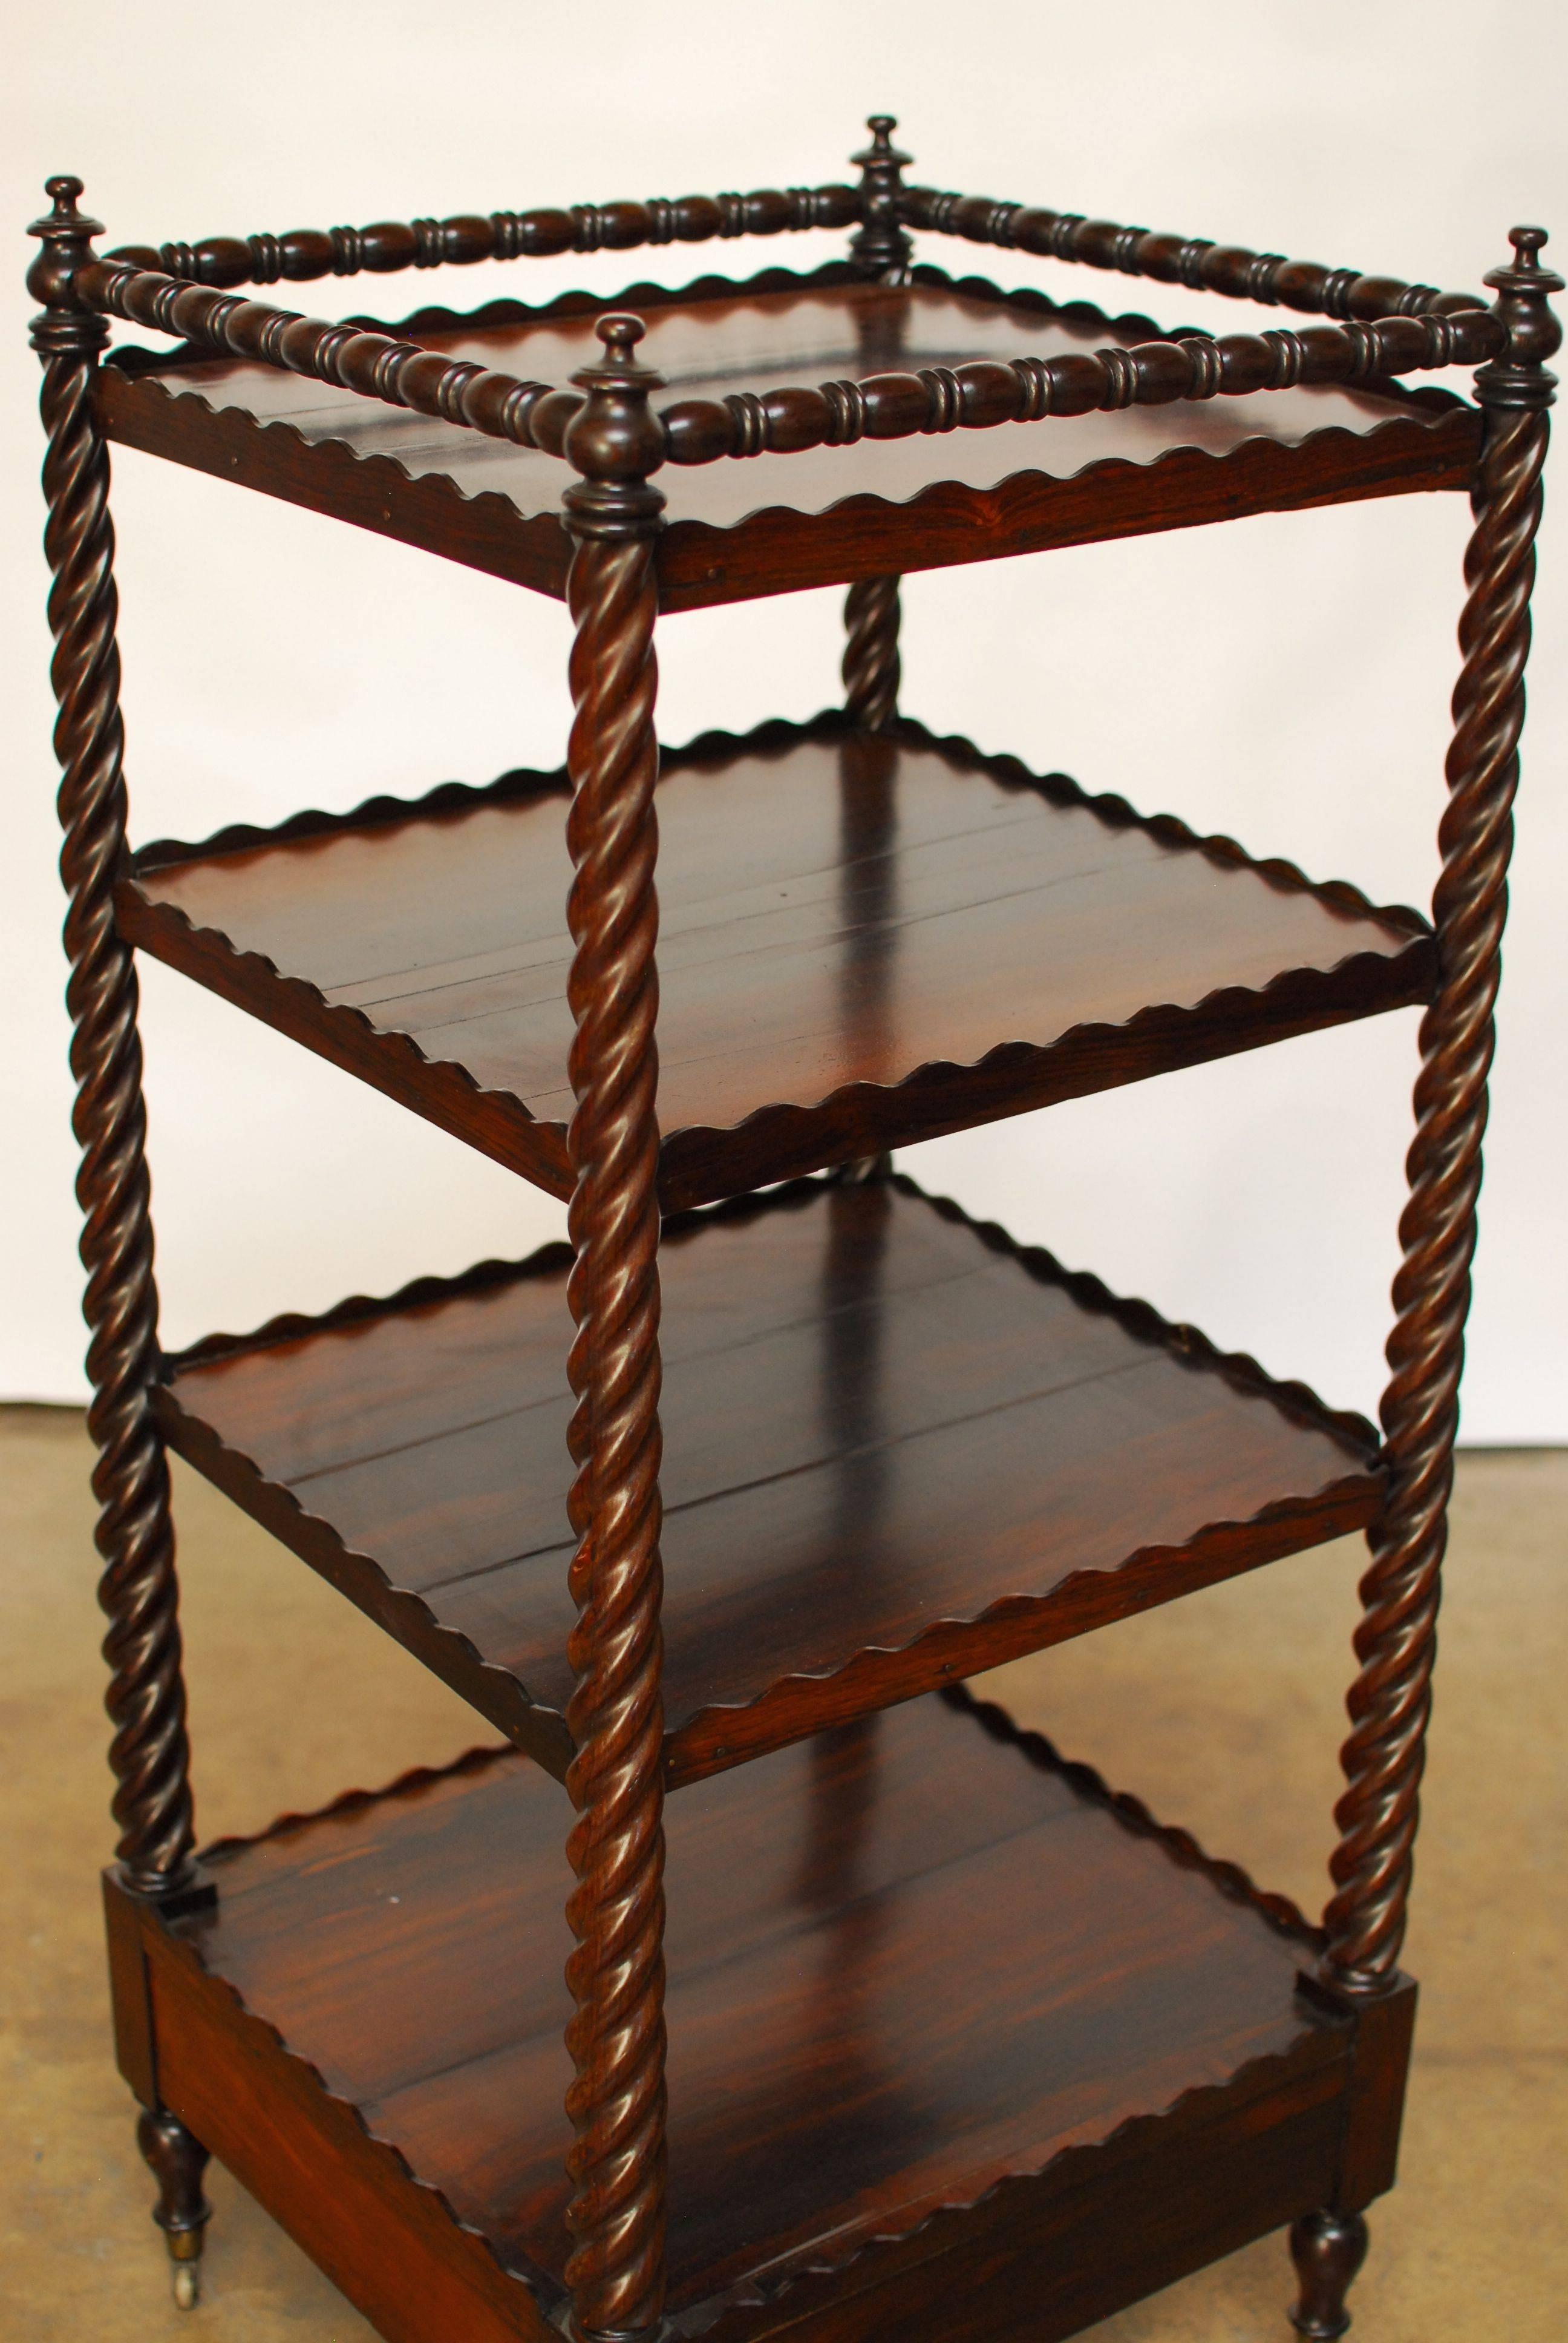 A gorgeous 19th century English Regency mahogany etagere with four galleried shelves. Featuring barley twist turned supports and the top tier having a turned wood gallery. The shelf rests on original brass casters and turned finials surmount the top